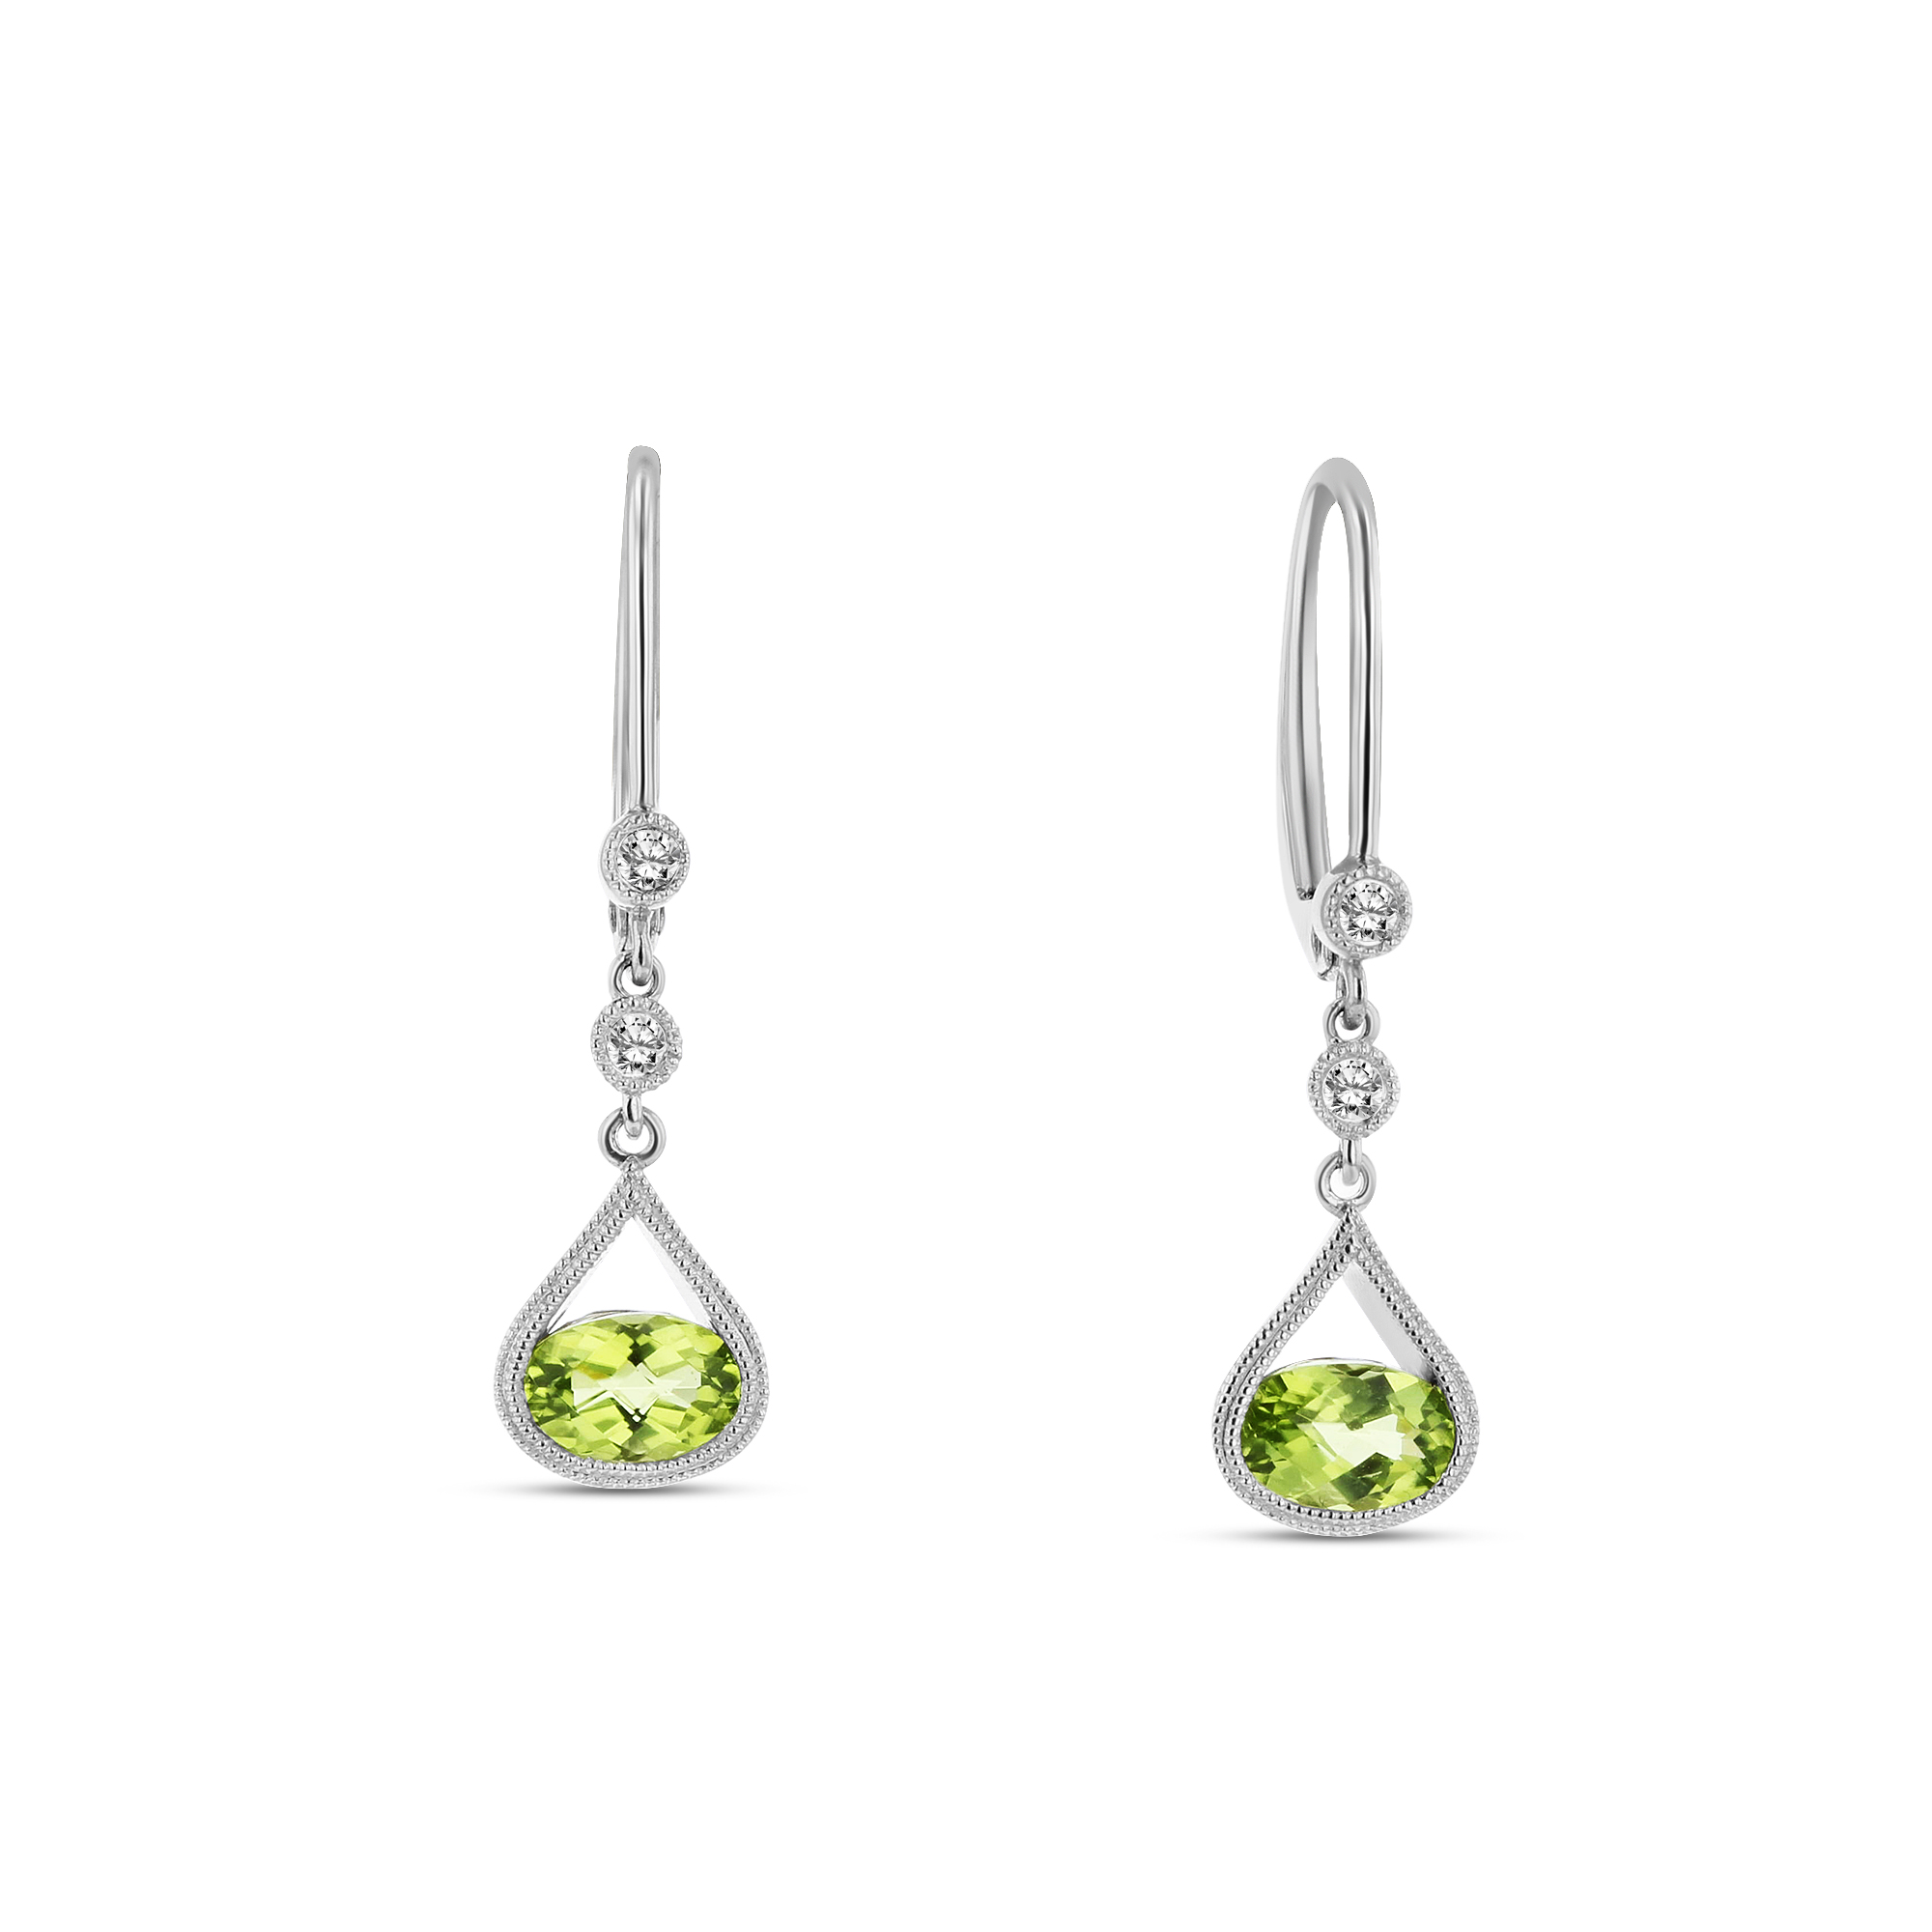 View 0.07ctw Diamond and Peridot Earrings in 14k White Gold